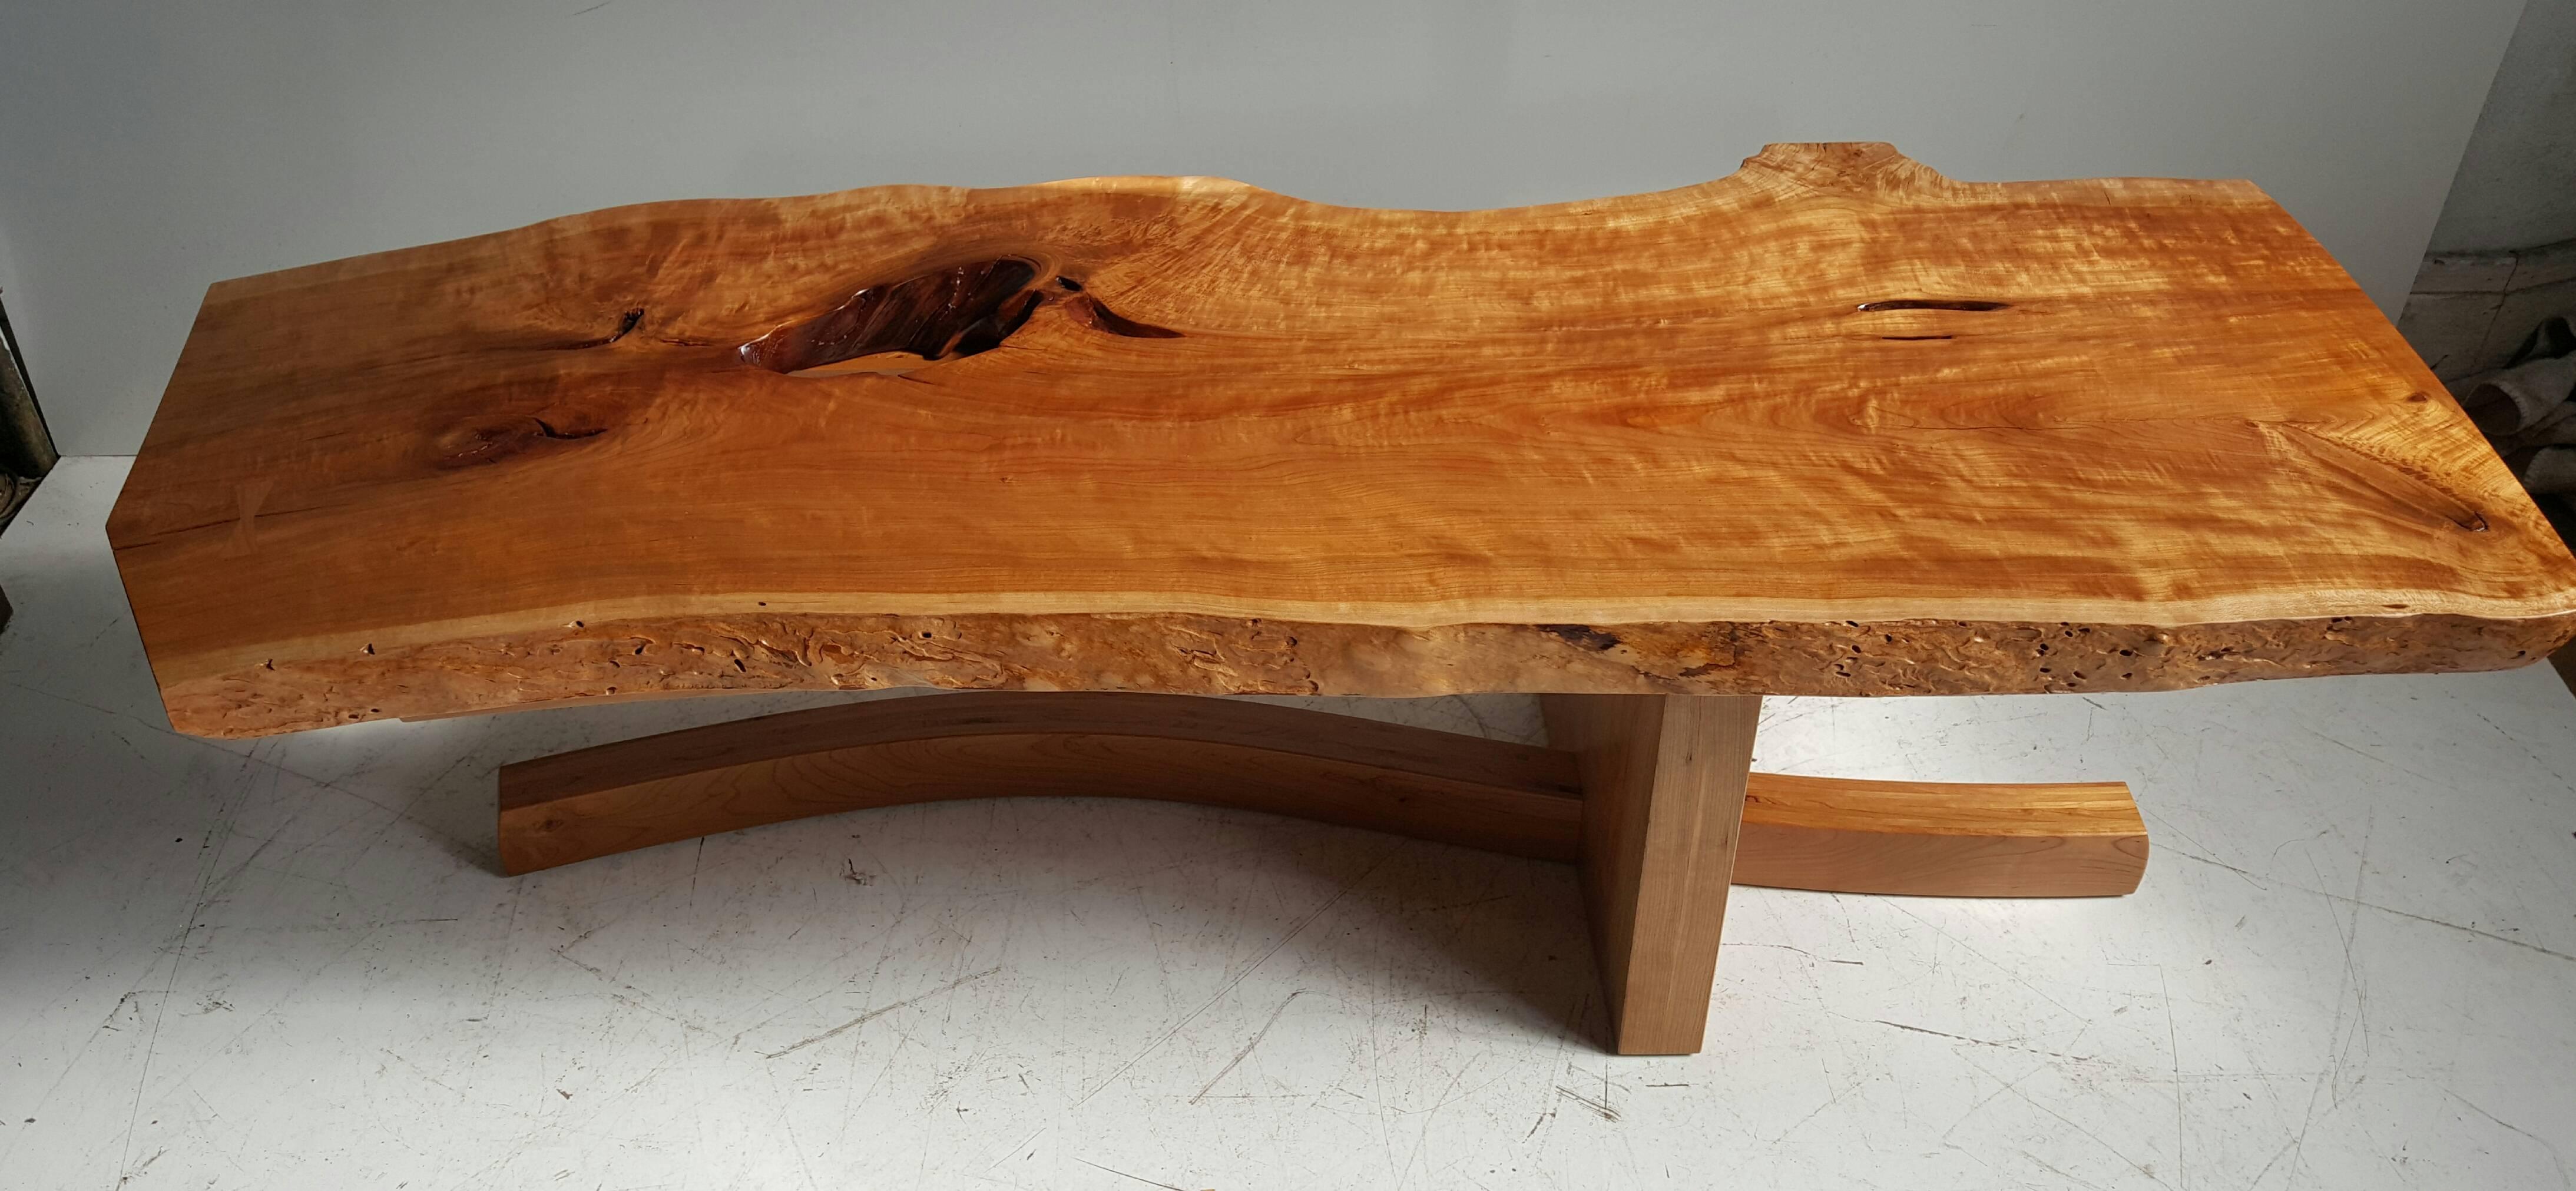 Modernist Live-Edge Figured Cherrywood Coffee Table, Griff Logan In Excellent Condition For Sale In Buffalo, NY